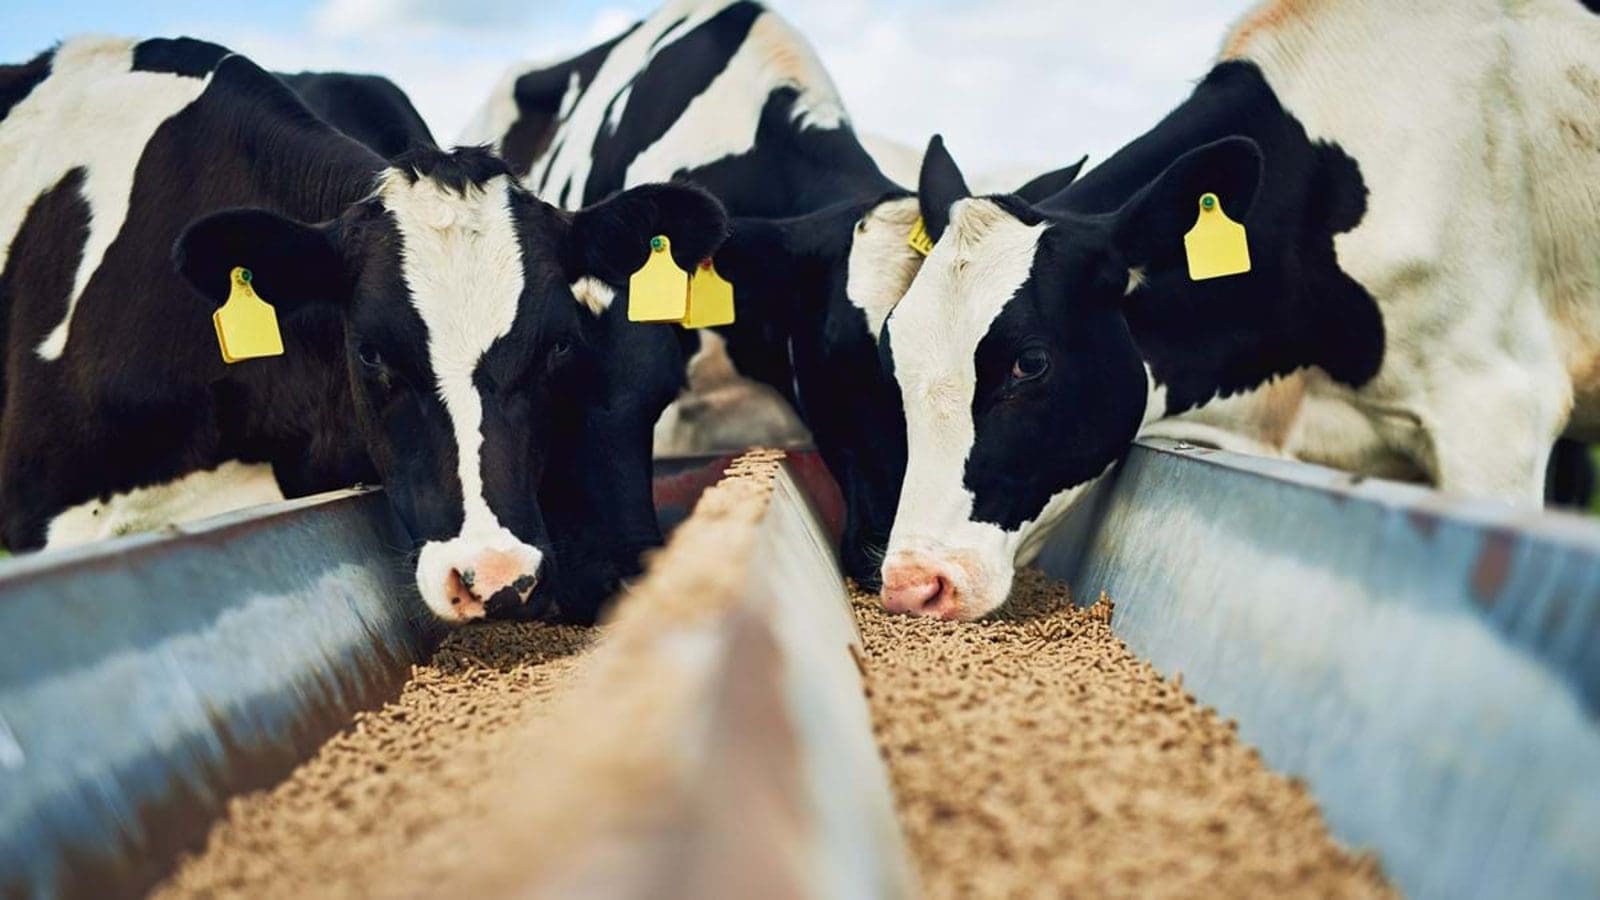 Mootral unveils breakthrough technology for methane reduction in confined and grazing cows